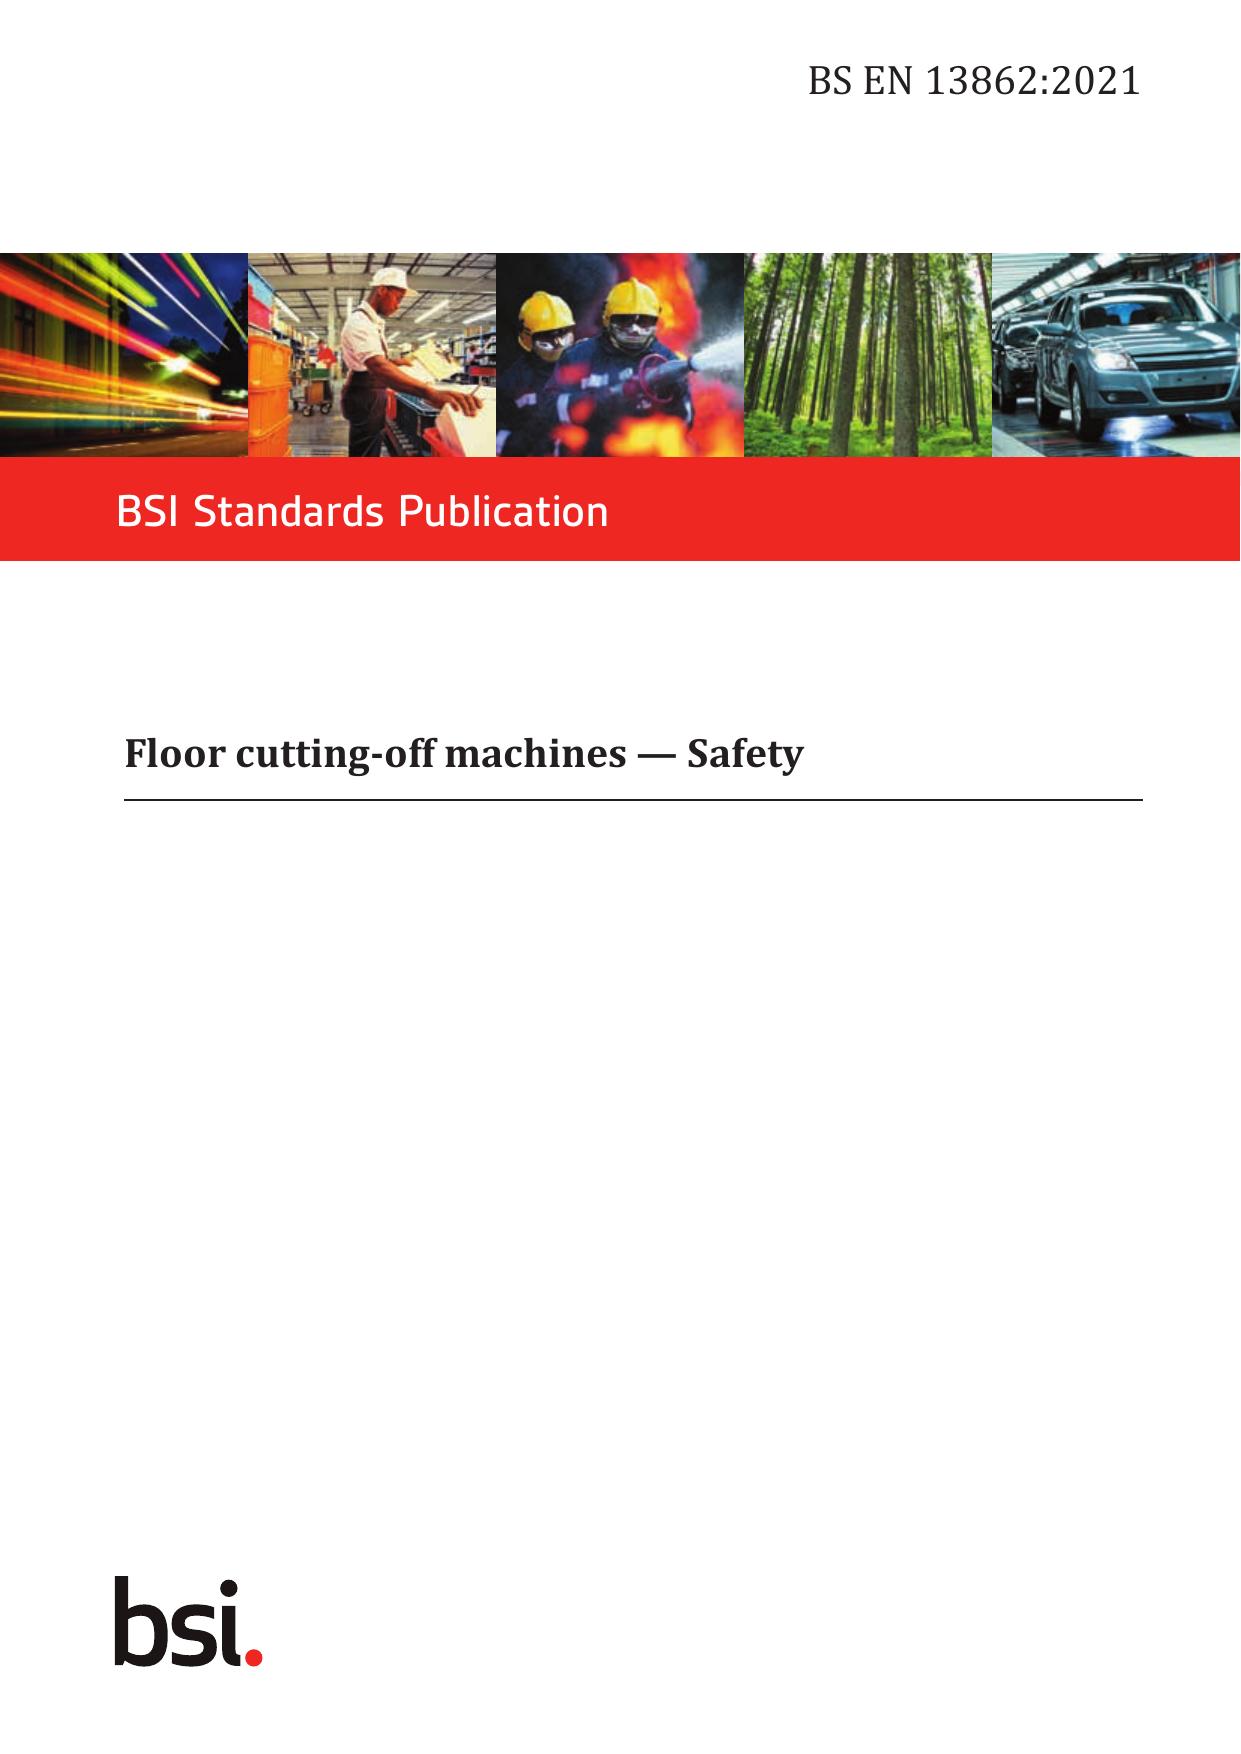 BS EN 13862:2021 by The British Standards Institution